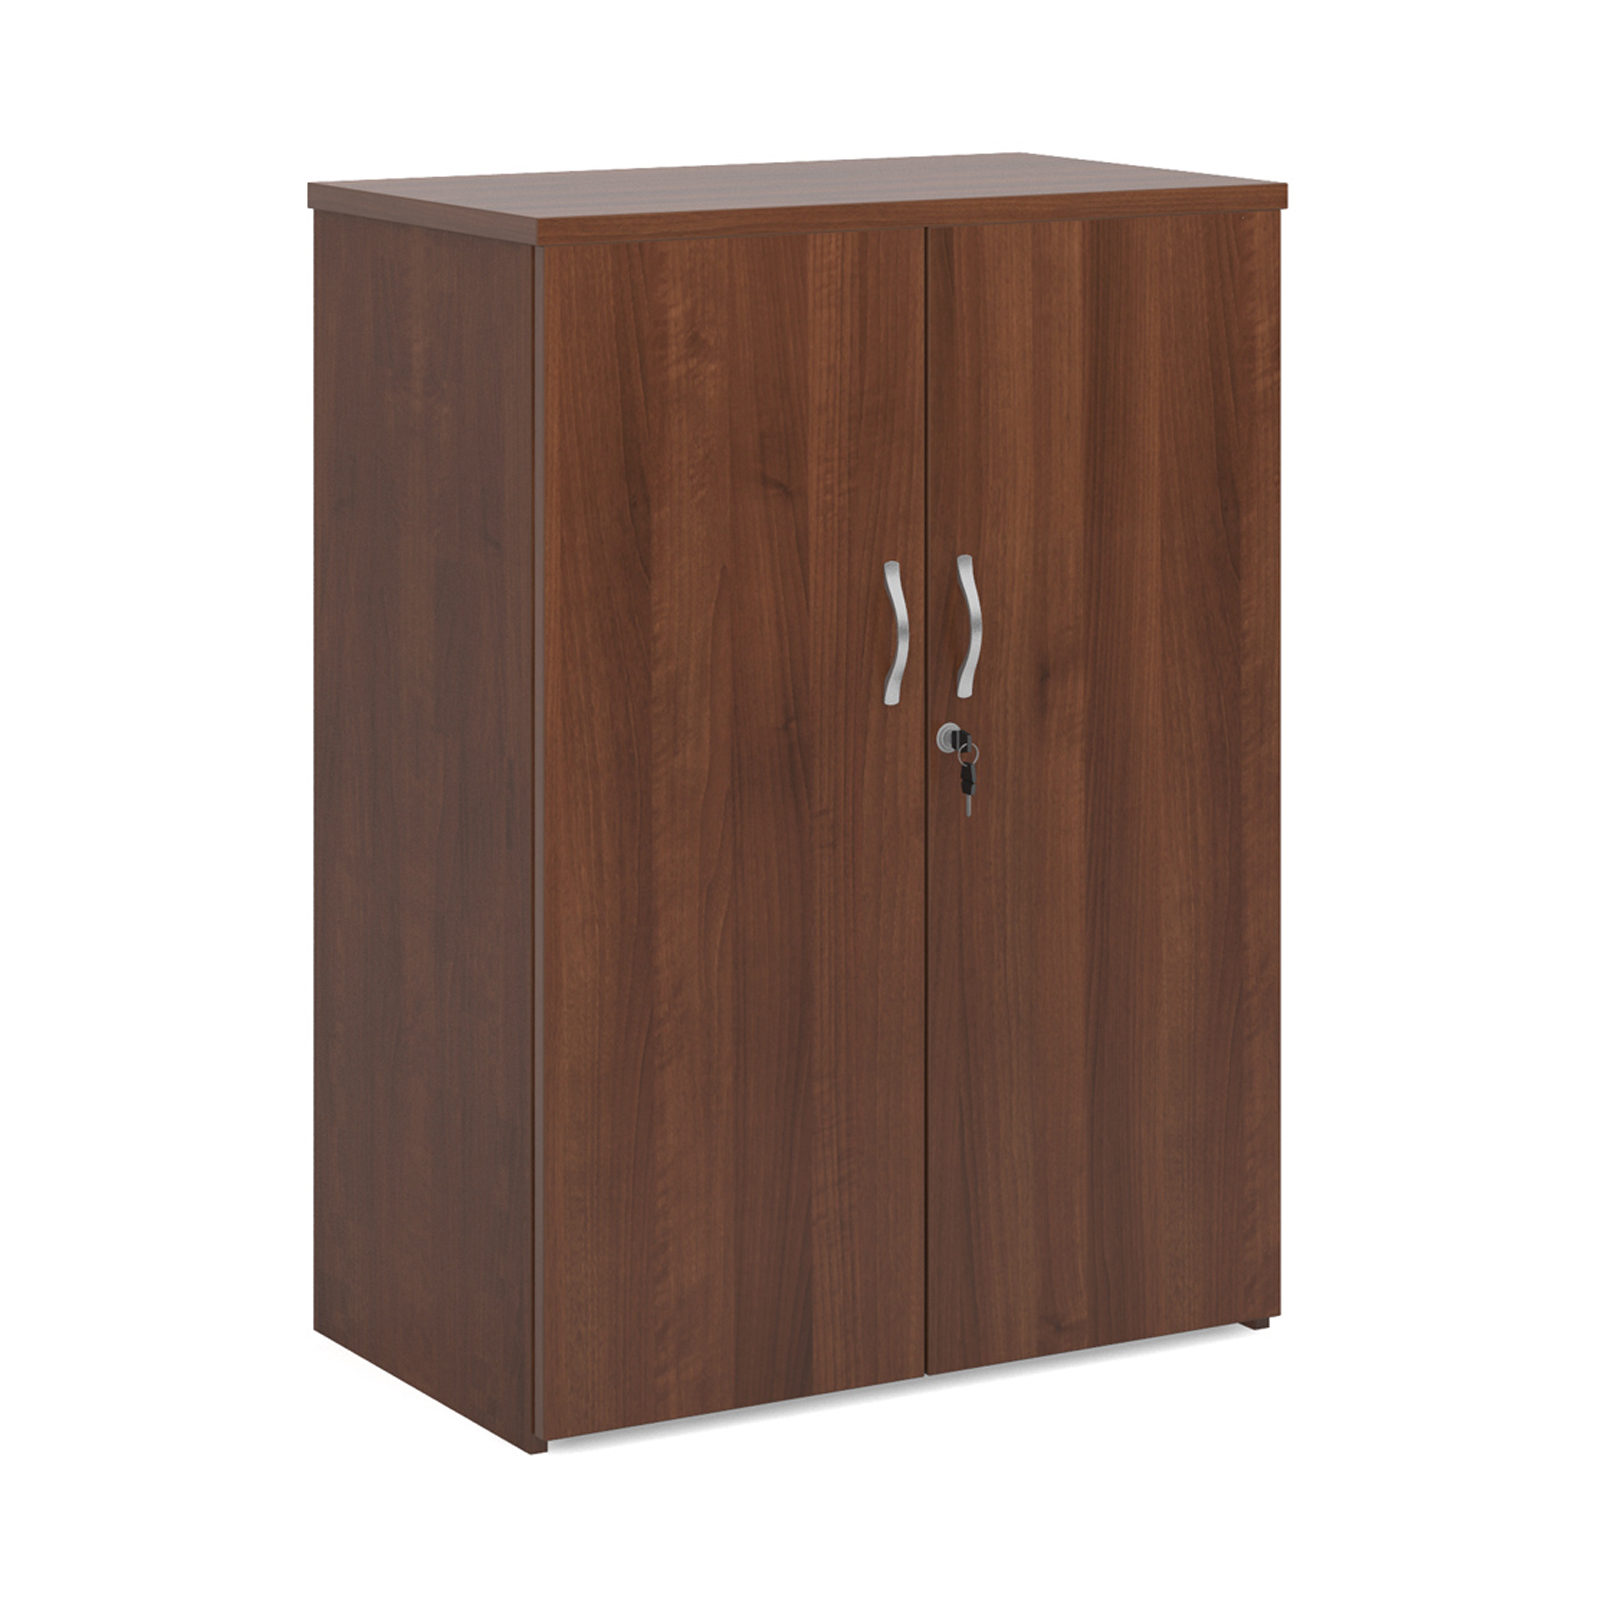 Up to 1200mm High Universal double door cupboard 1090mm high with 2 shelves - walnut